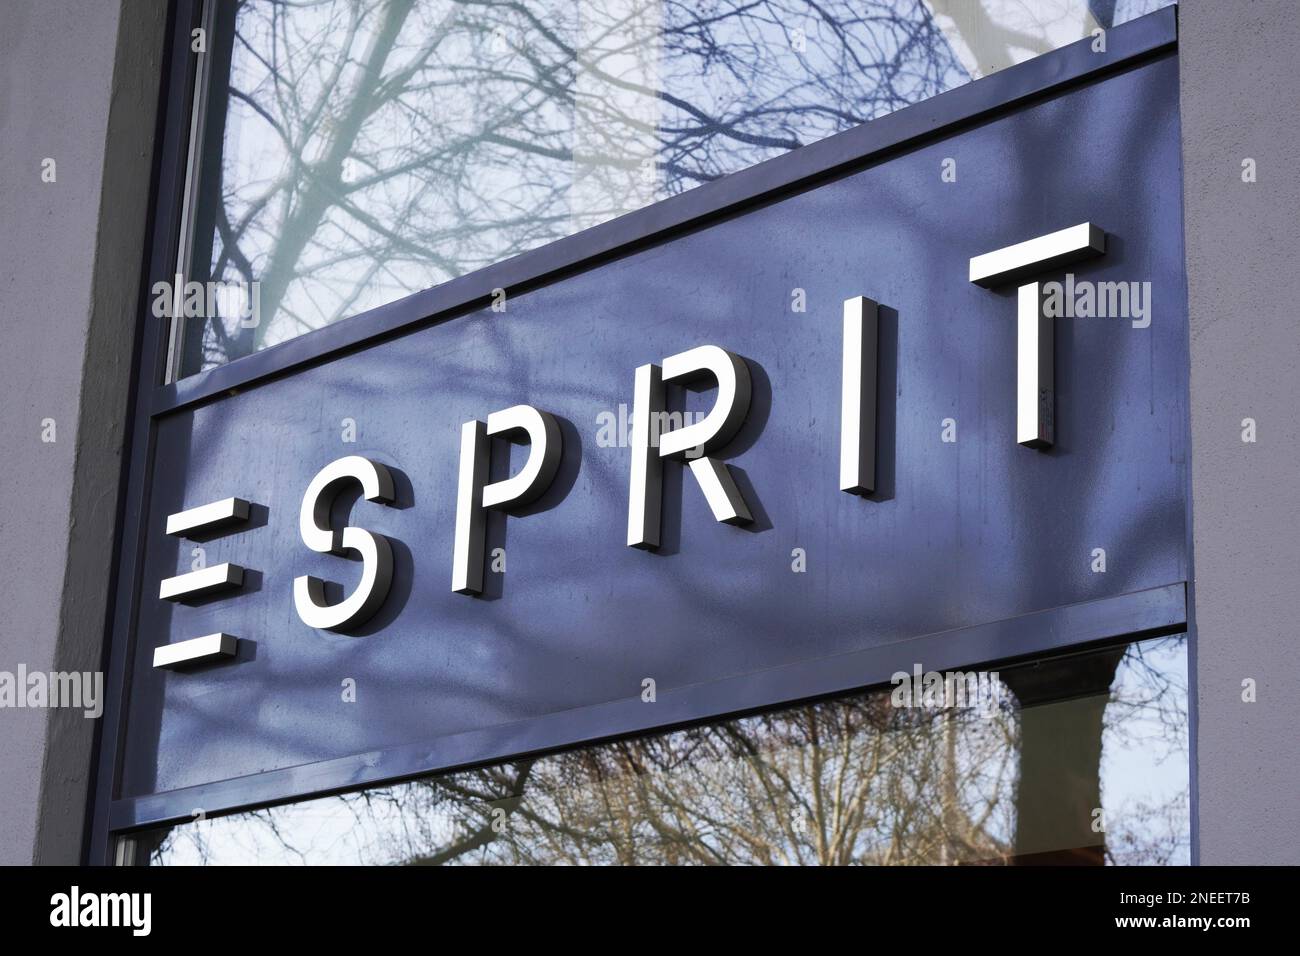 Hannover, Germany - March 2, 2020: Esprit brand name sign at local fashion retail store Stock Photo